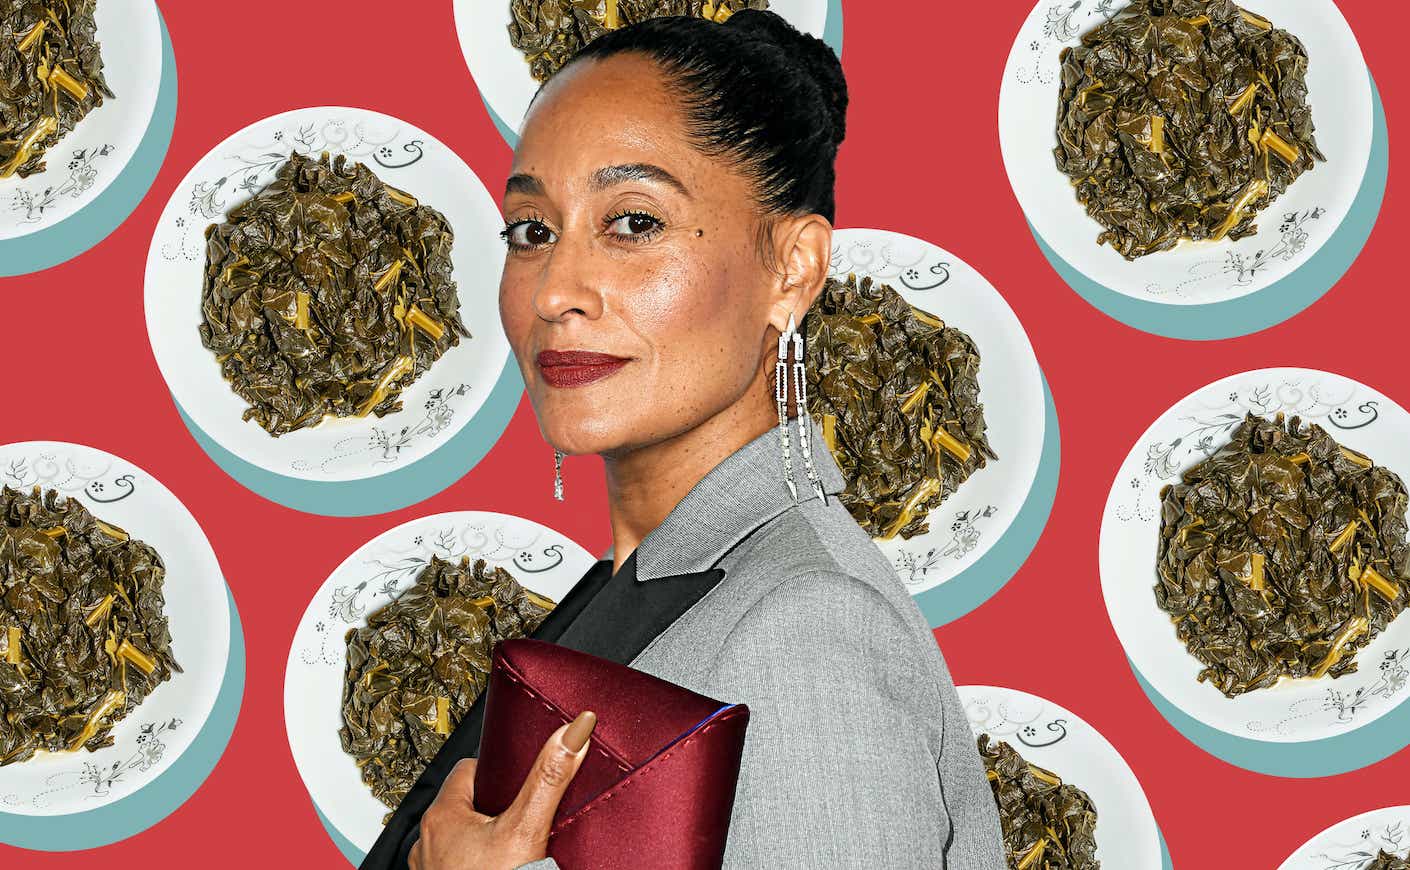 Tracee Ellis Ross smiles while a collage of collard greens floats behind her head.